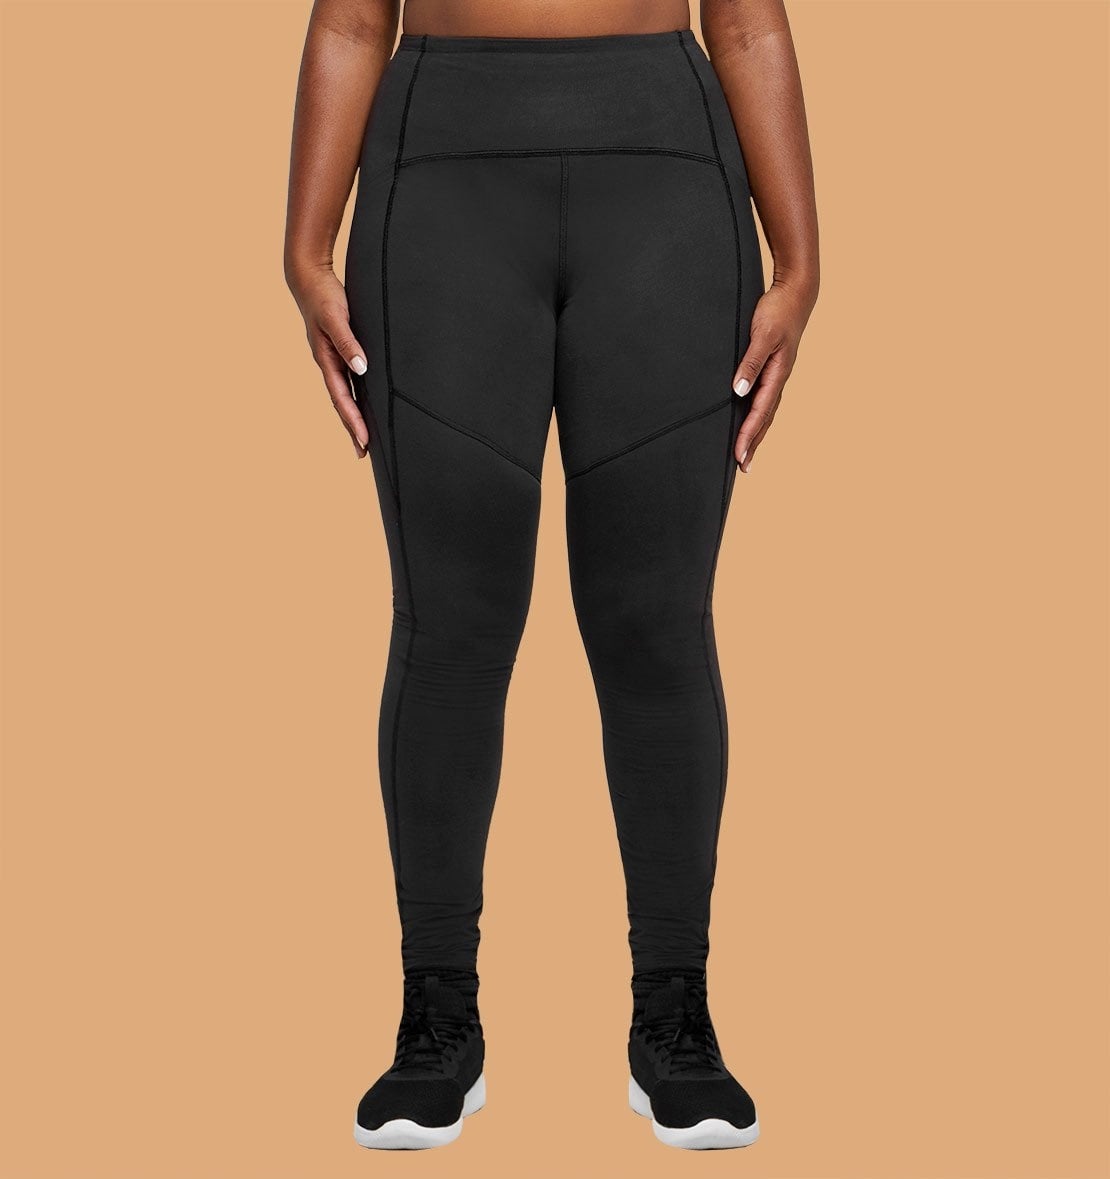 Period-Proof Leggings to Wear During Your Workout